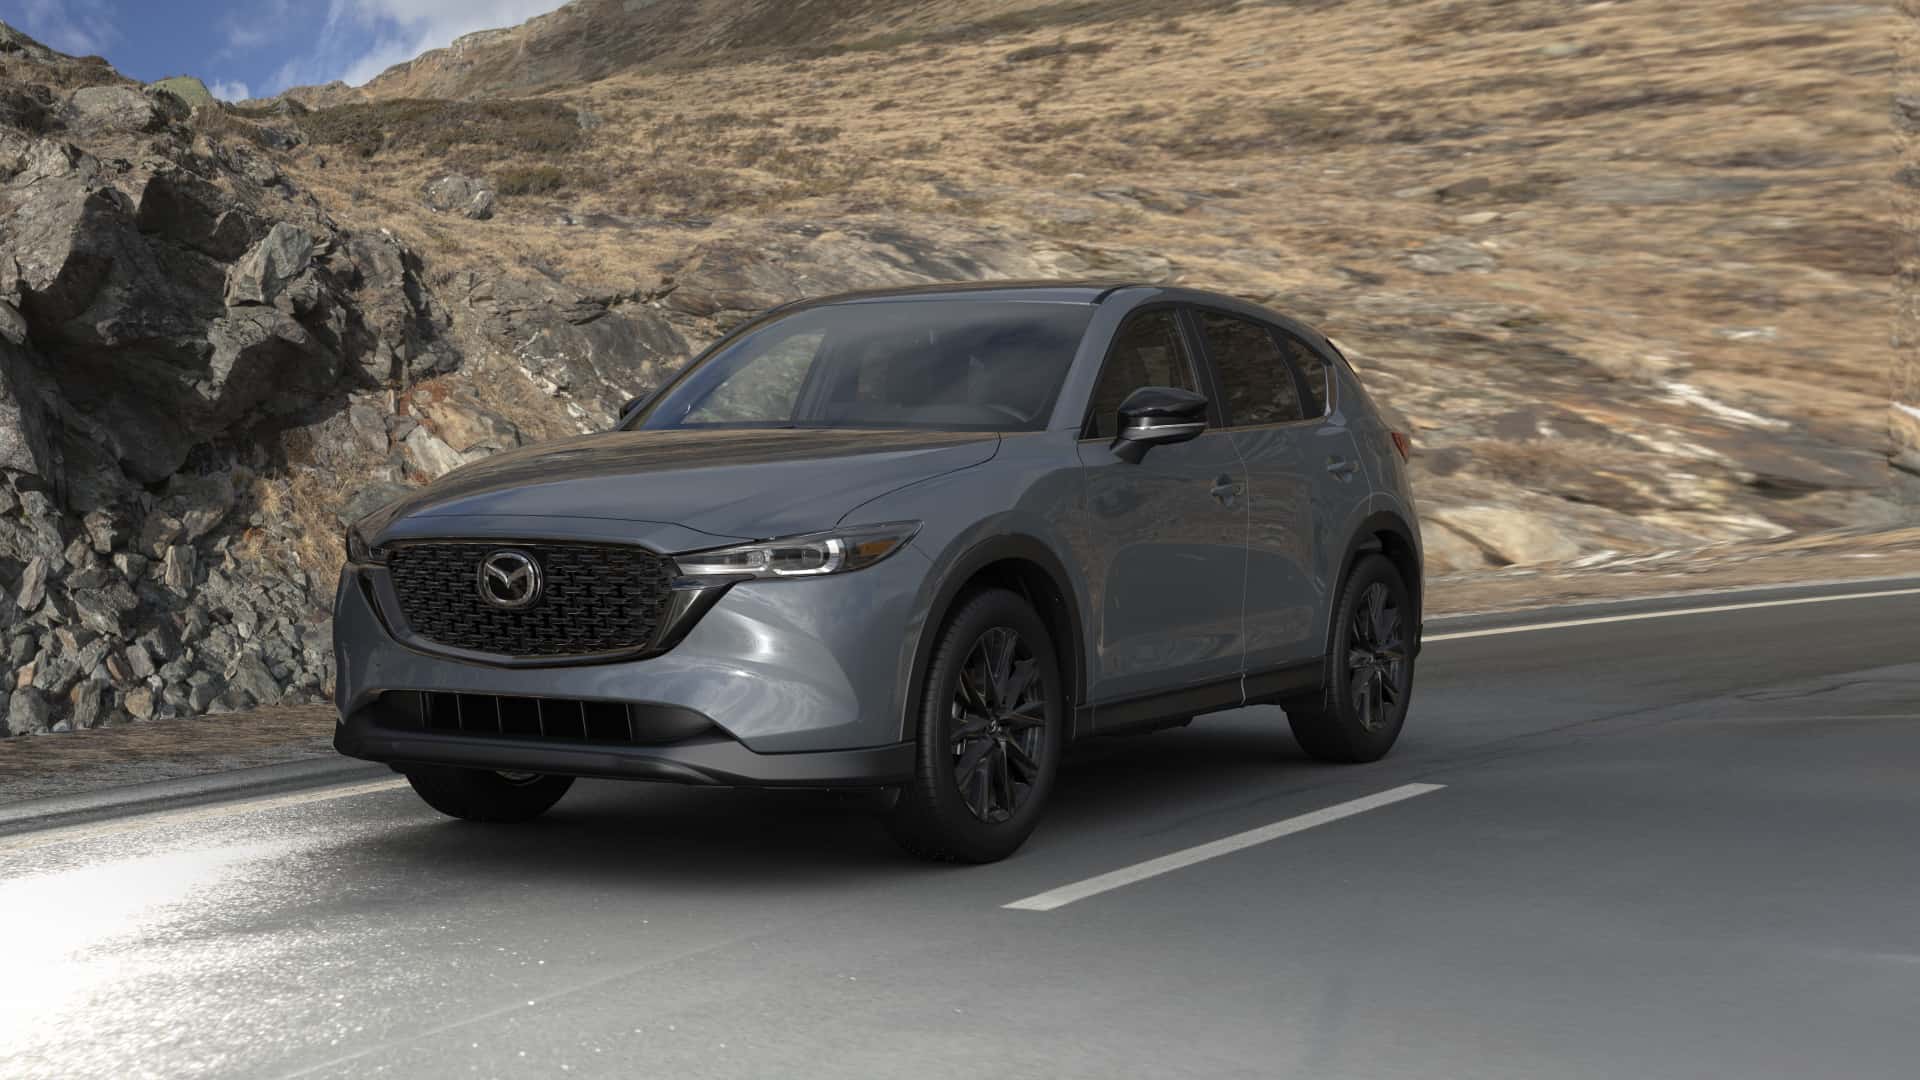 2023 Mazda CX-5 2.5 S Carbon Edition Polymetal Gray Metallic | Mazda of Milford in Milford CT